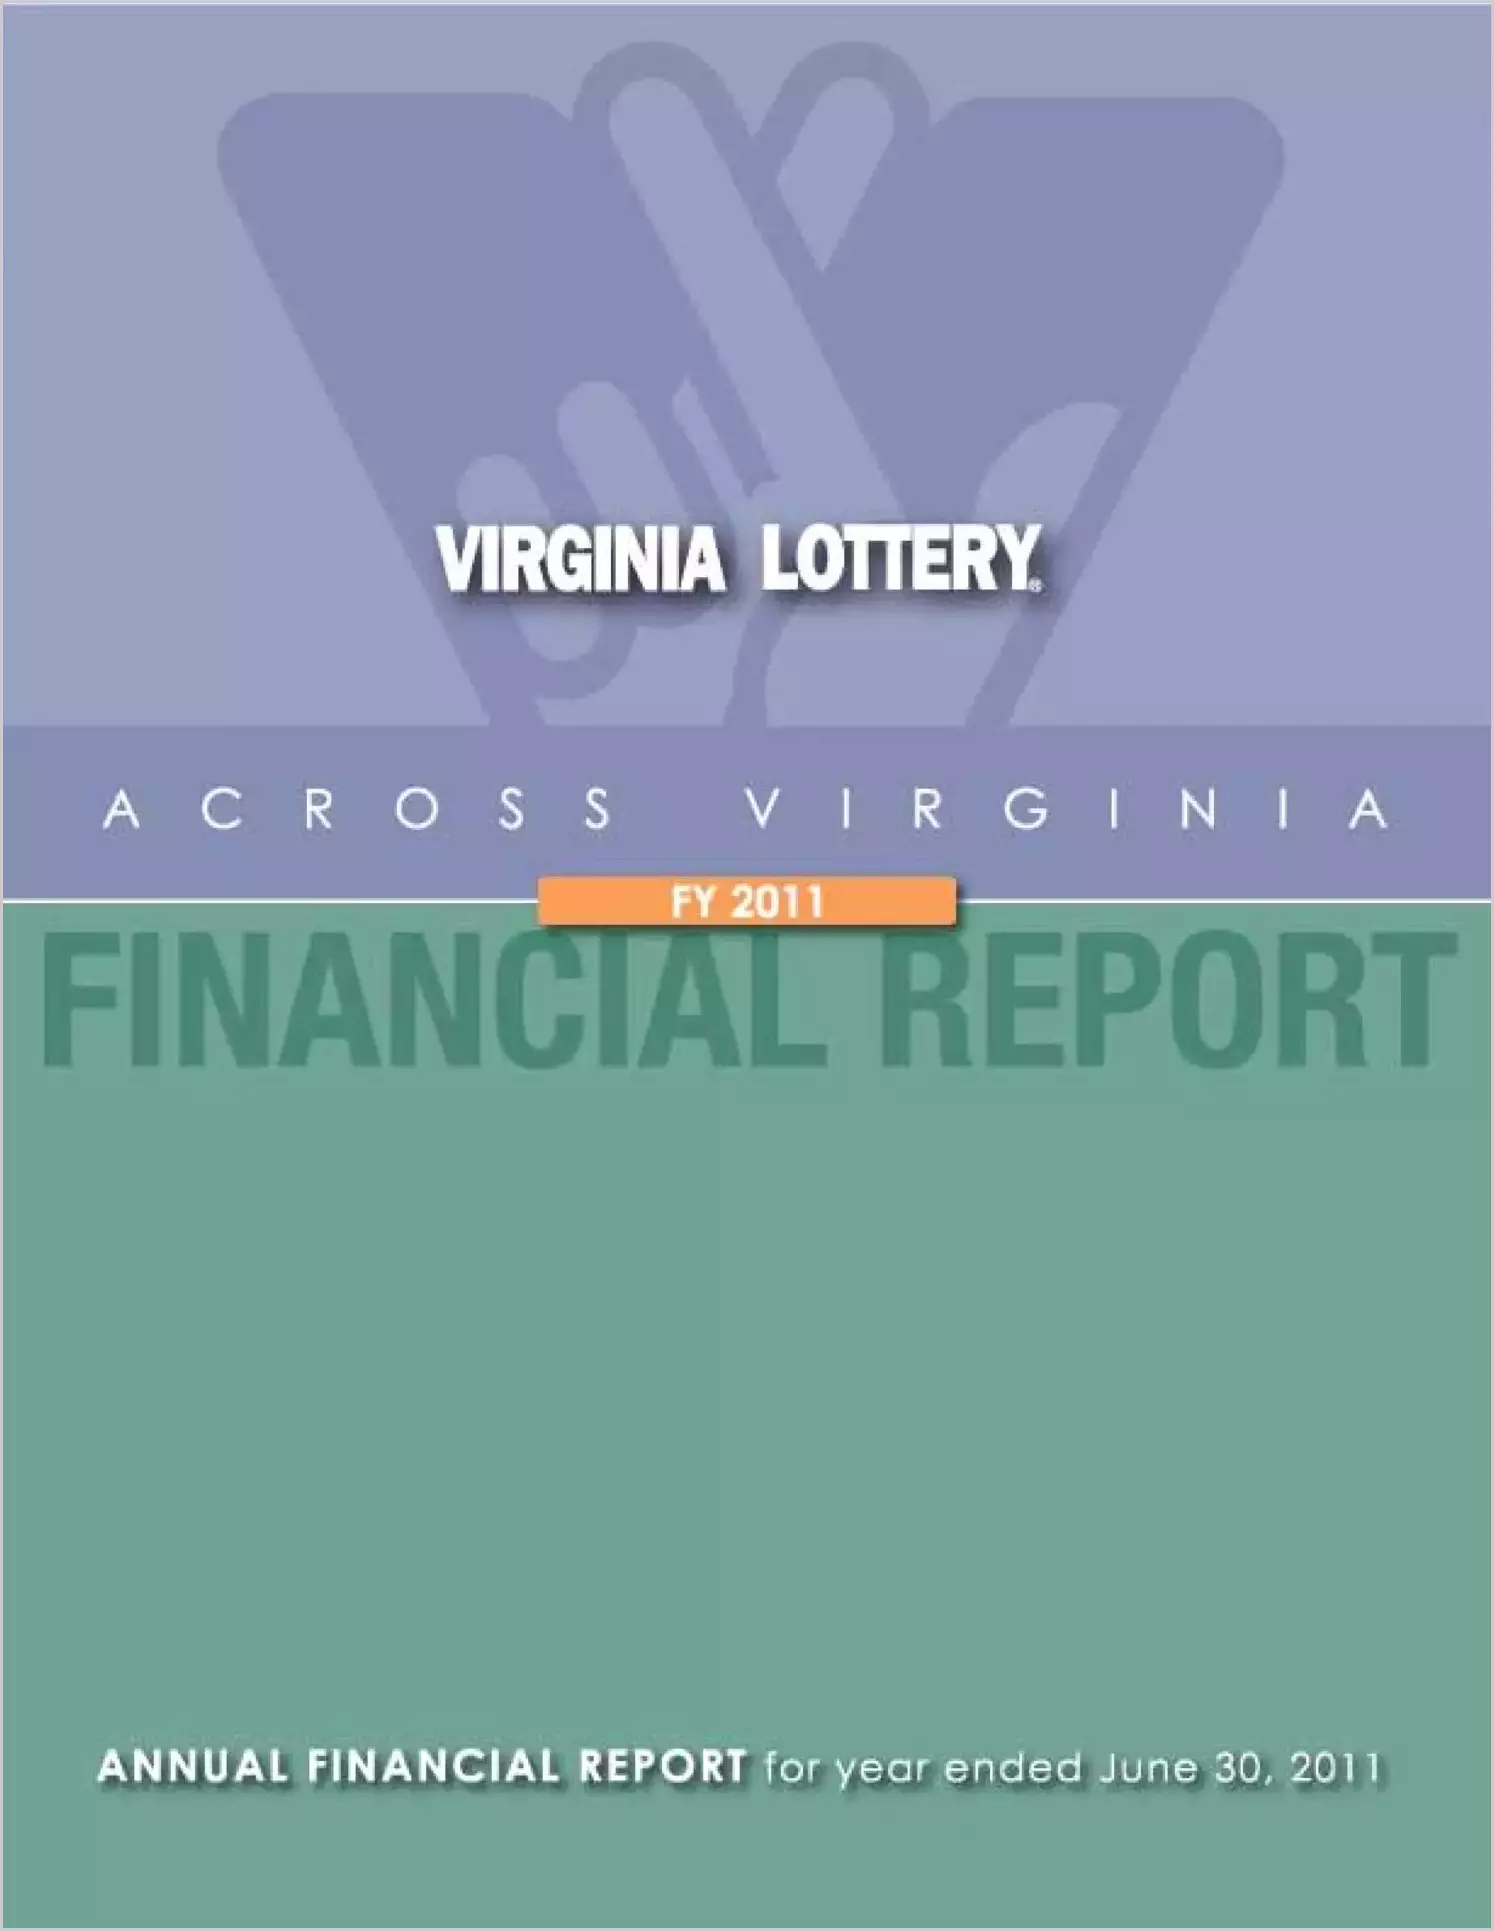 State Lottery Department Financial Statements for the year ended June 30, 2011